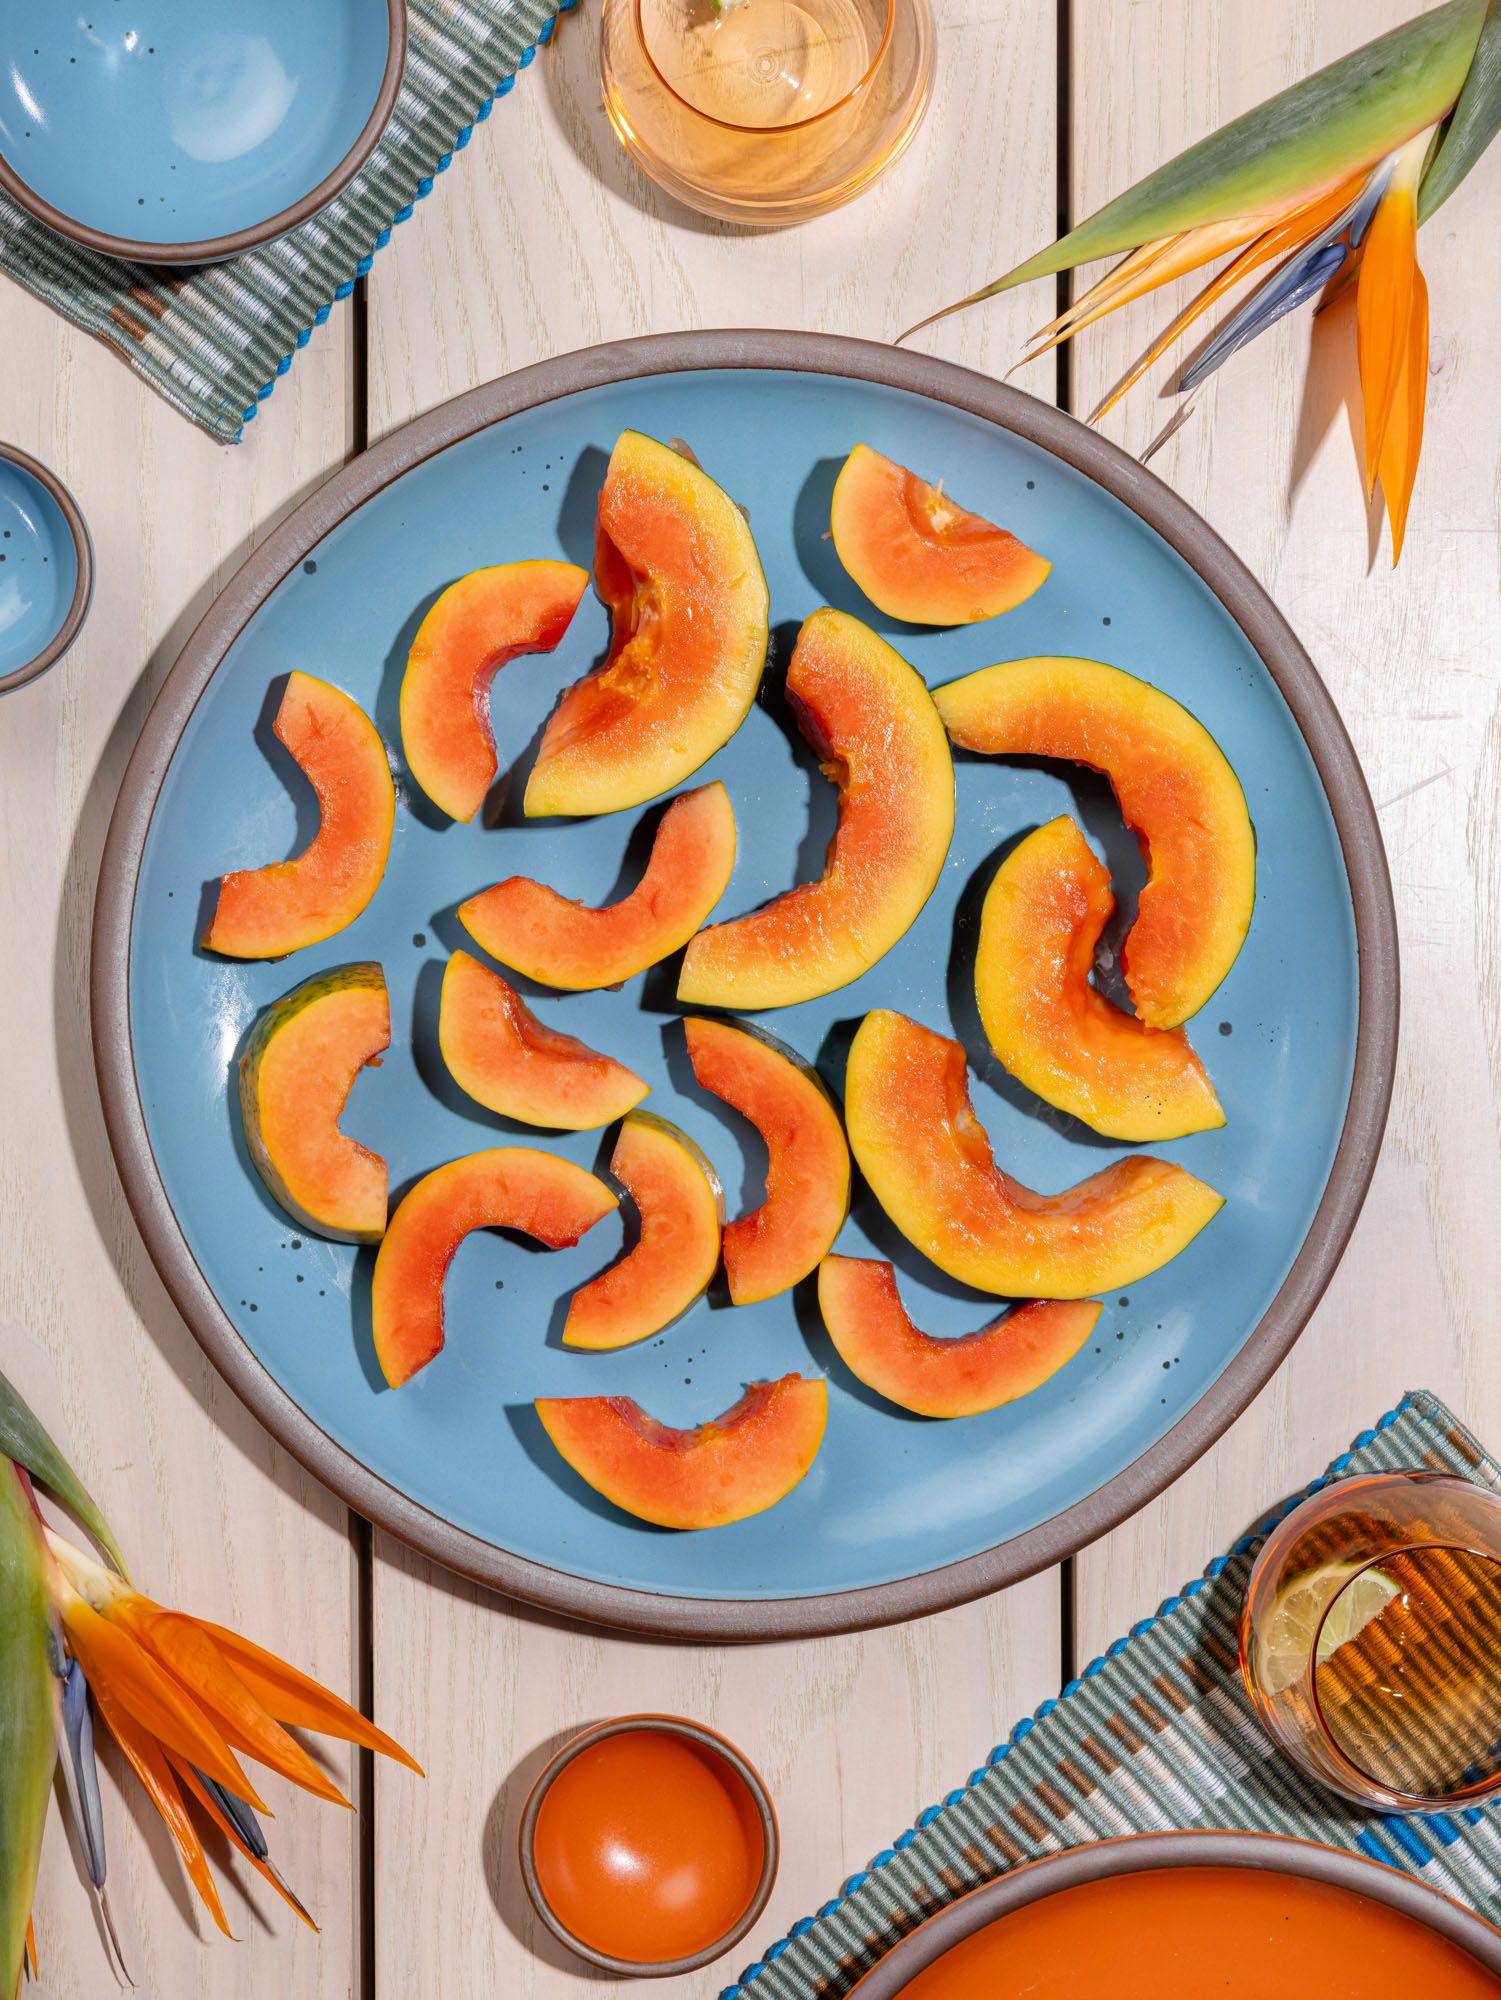 Sliced papayas are on a large ceramic platter in a robin's egg blue color featuring iron speckles and an unglazed rim